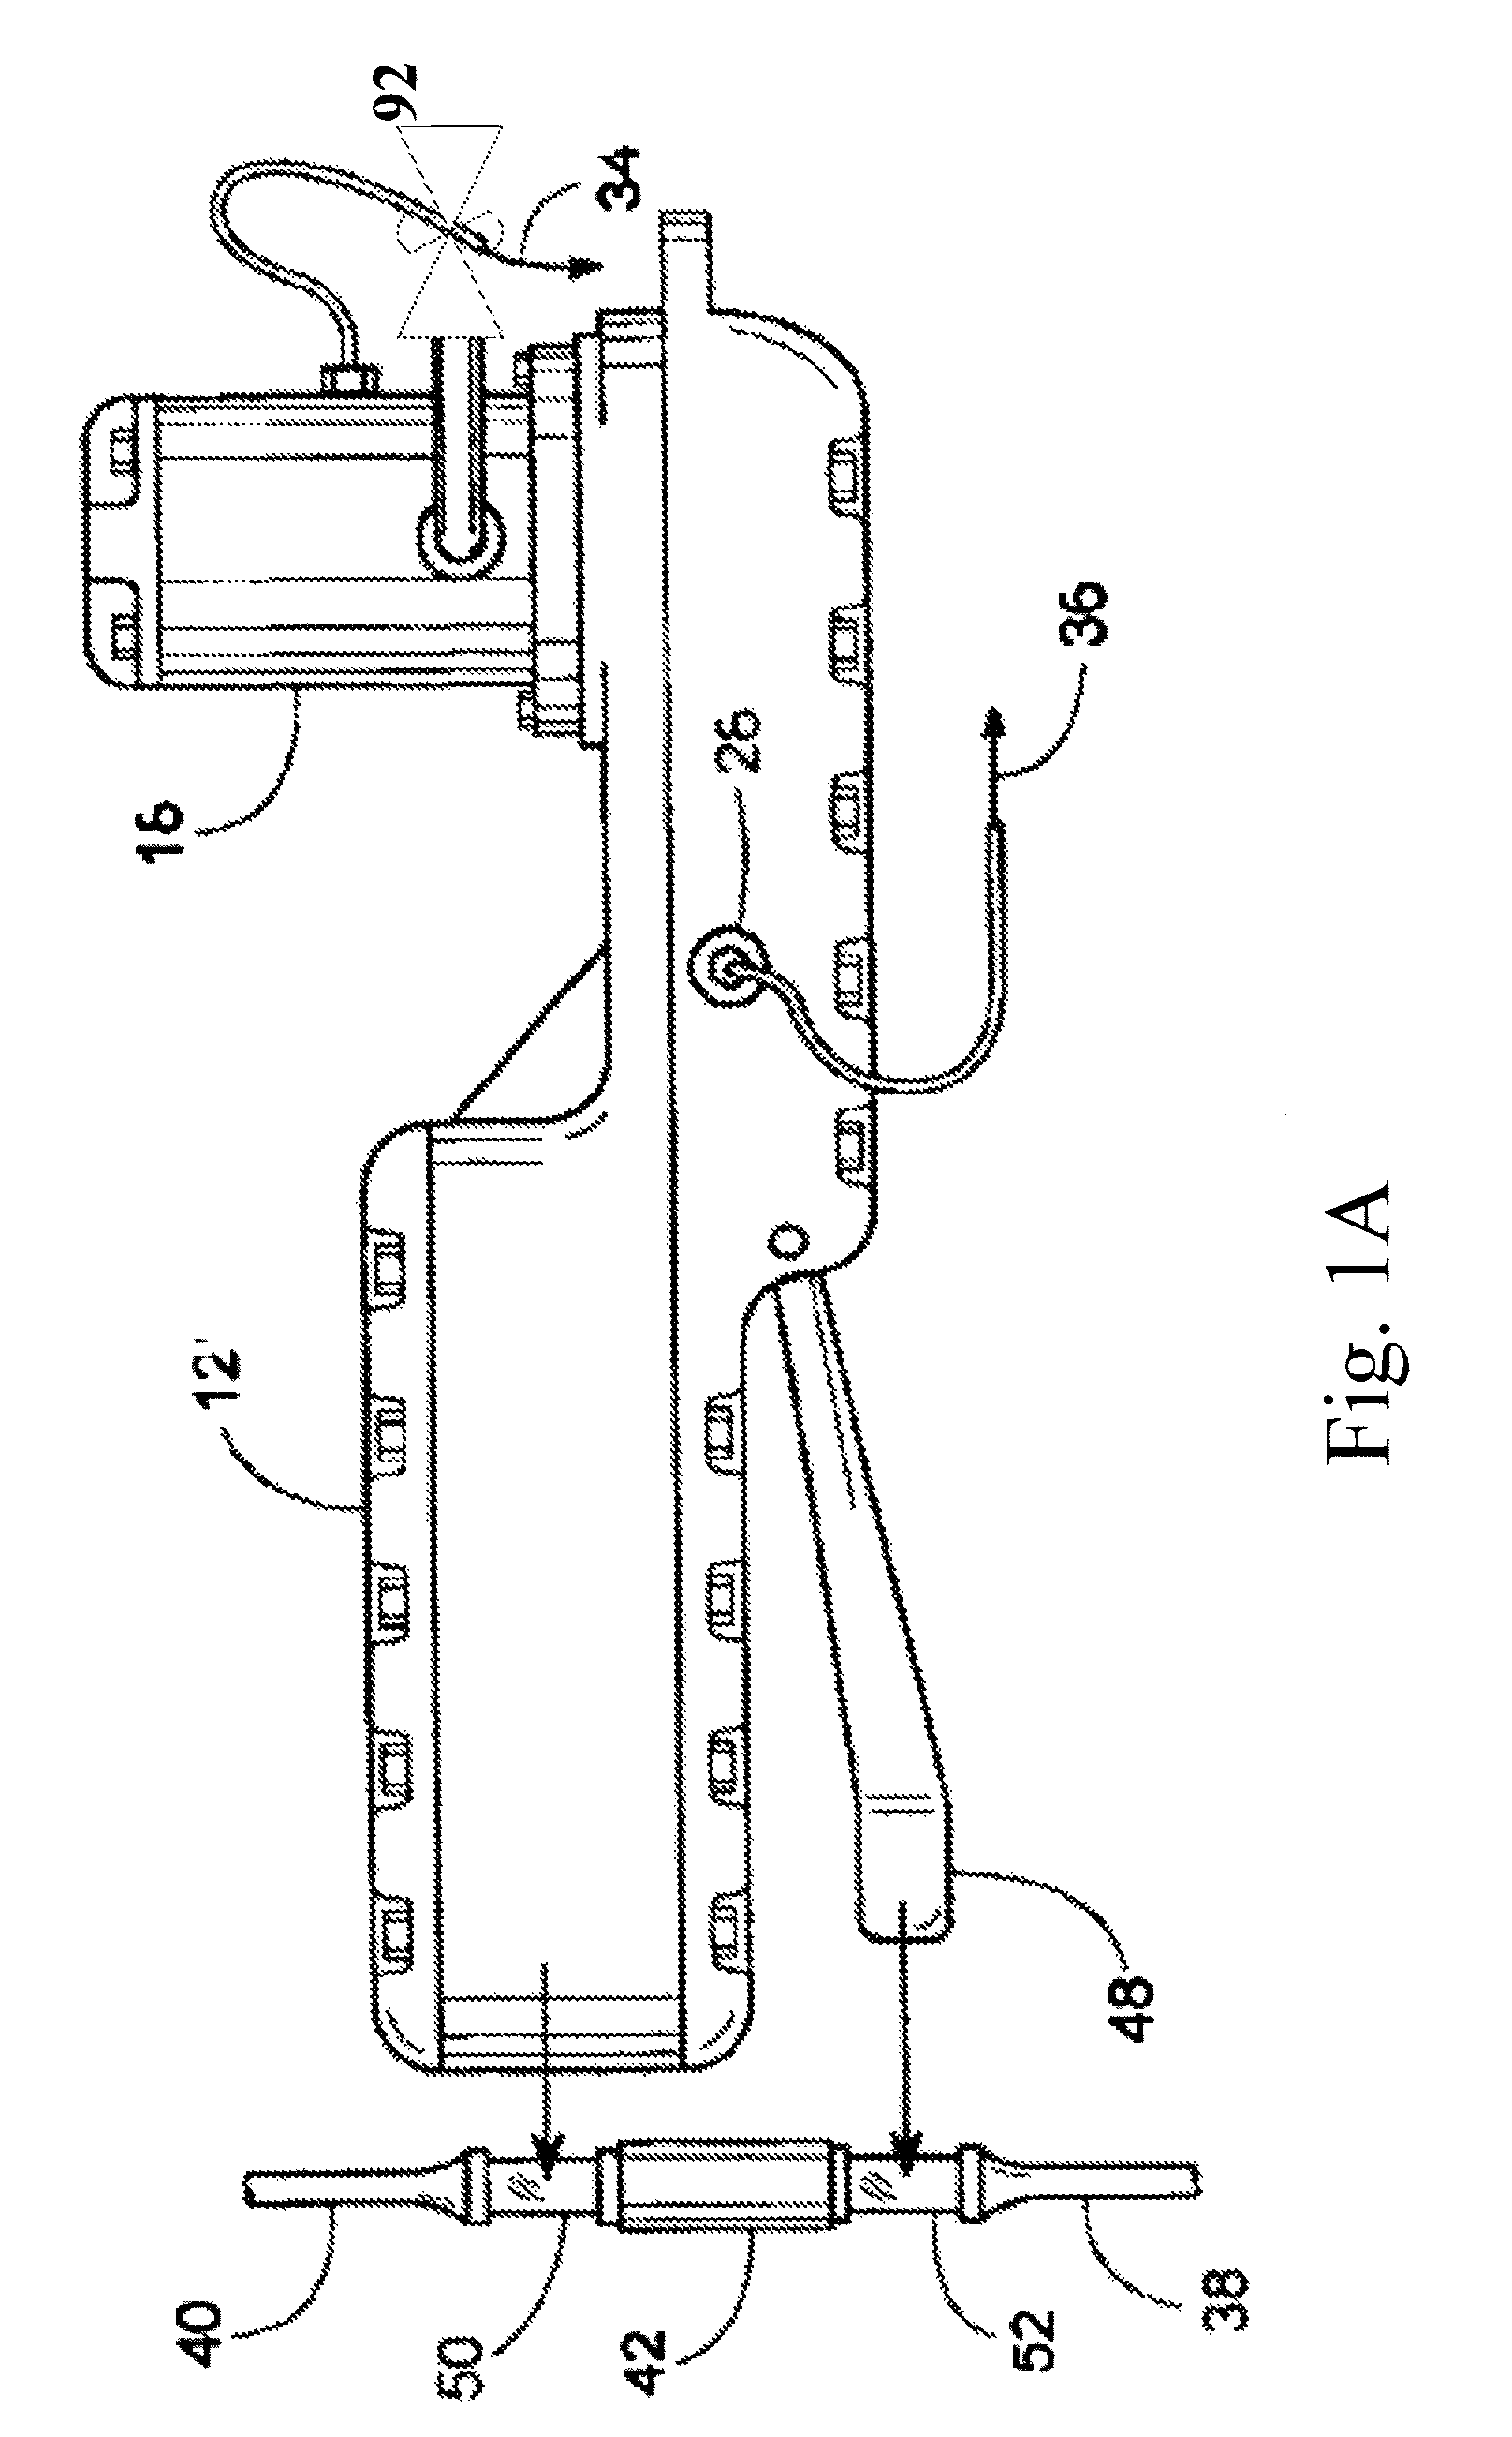 Method and system for monitoring the efficiency and health of a hydraulically driven system